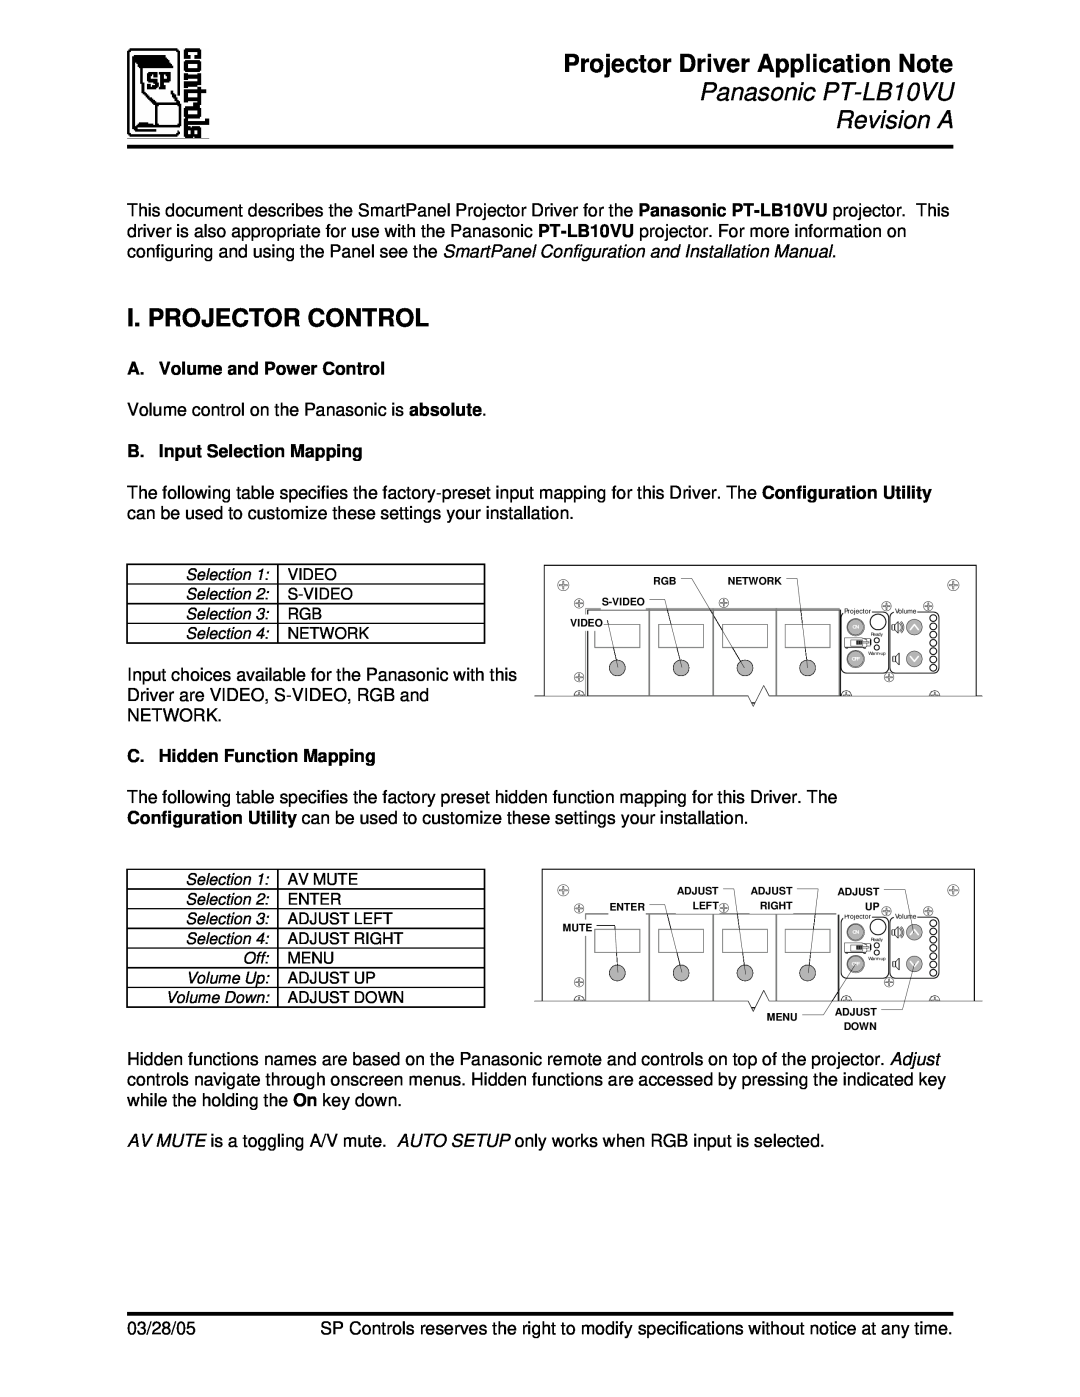 Philips PT-LB10VU quick start Projector Driver Application Note, I. Projector Control, A. Volume and Power Control 